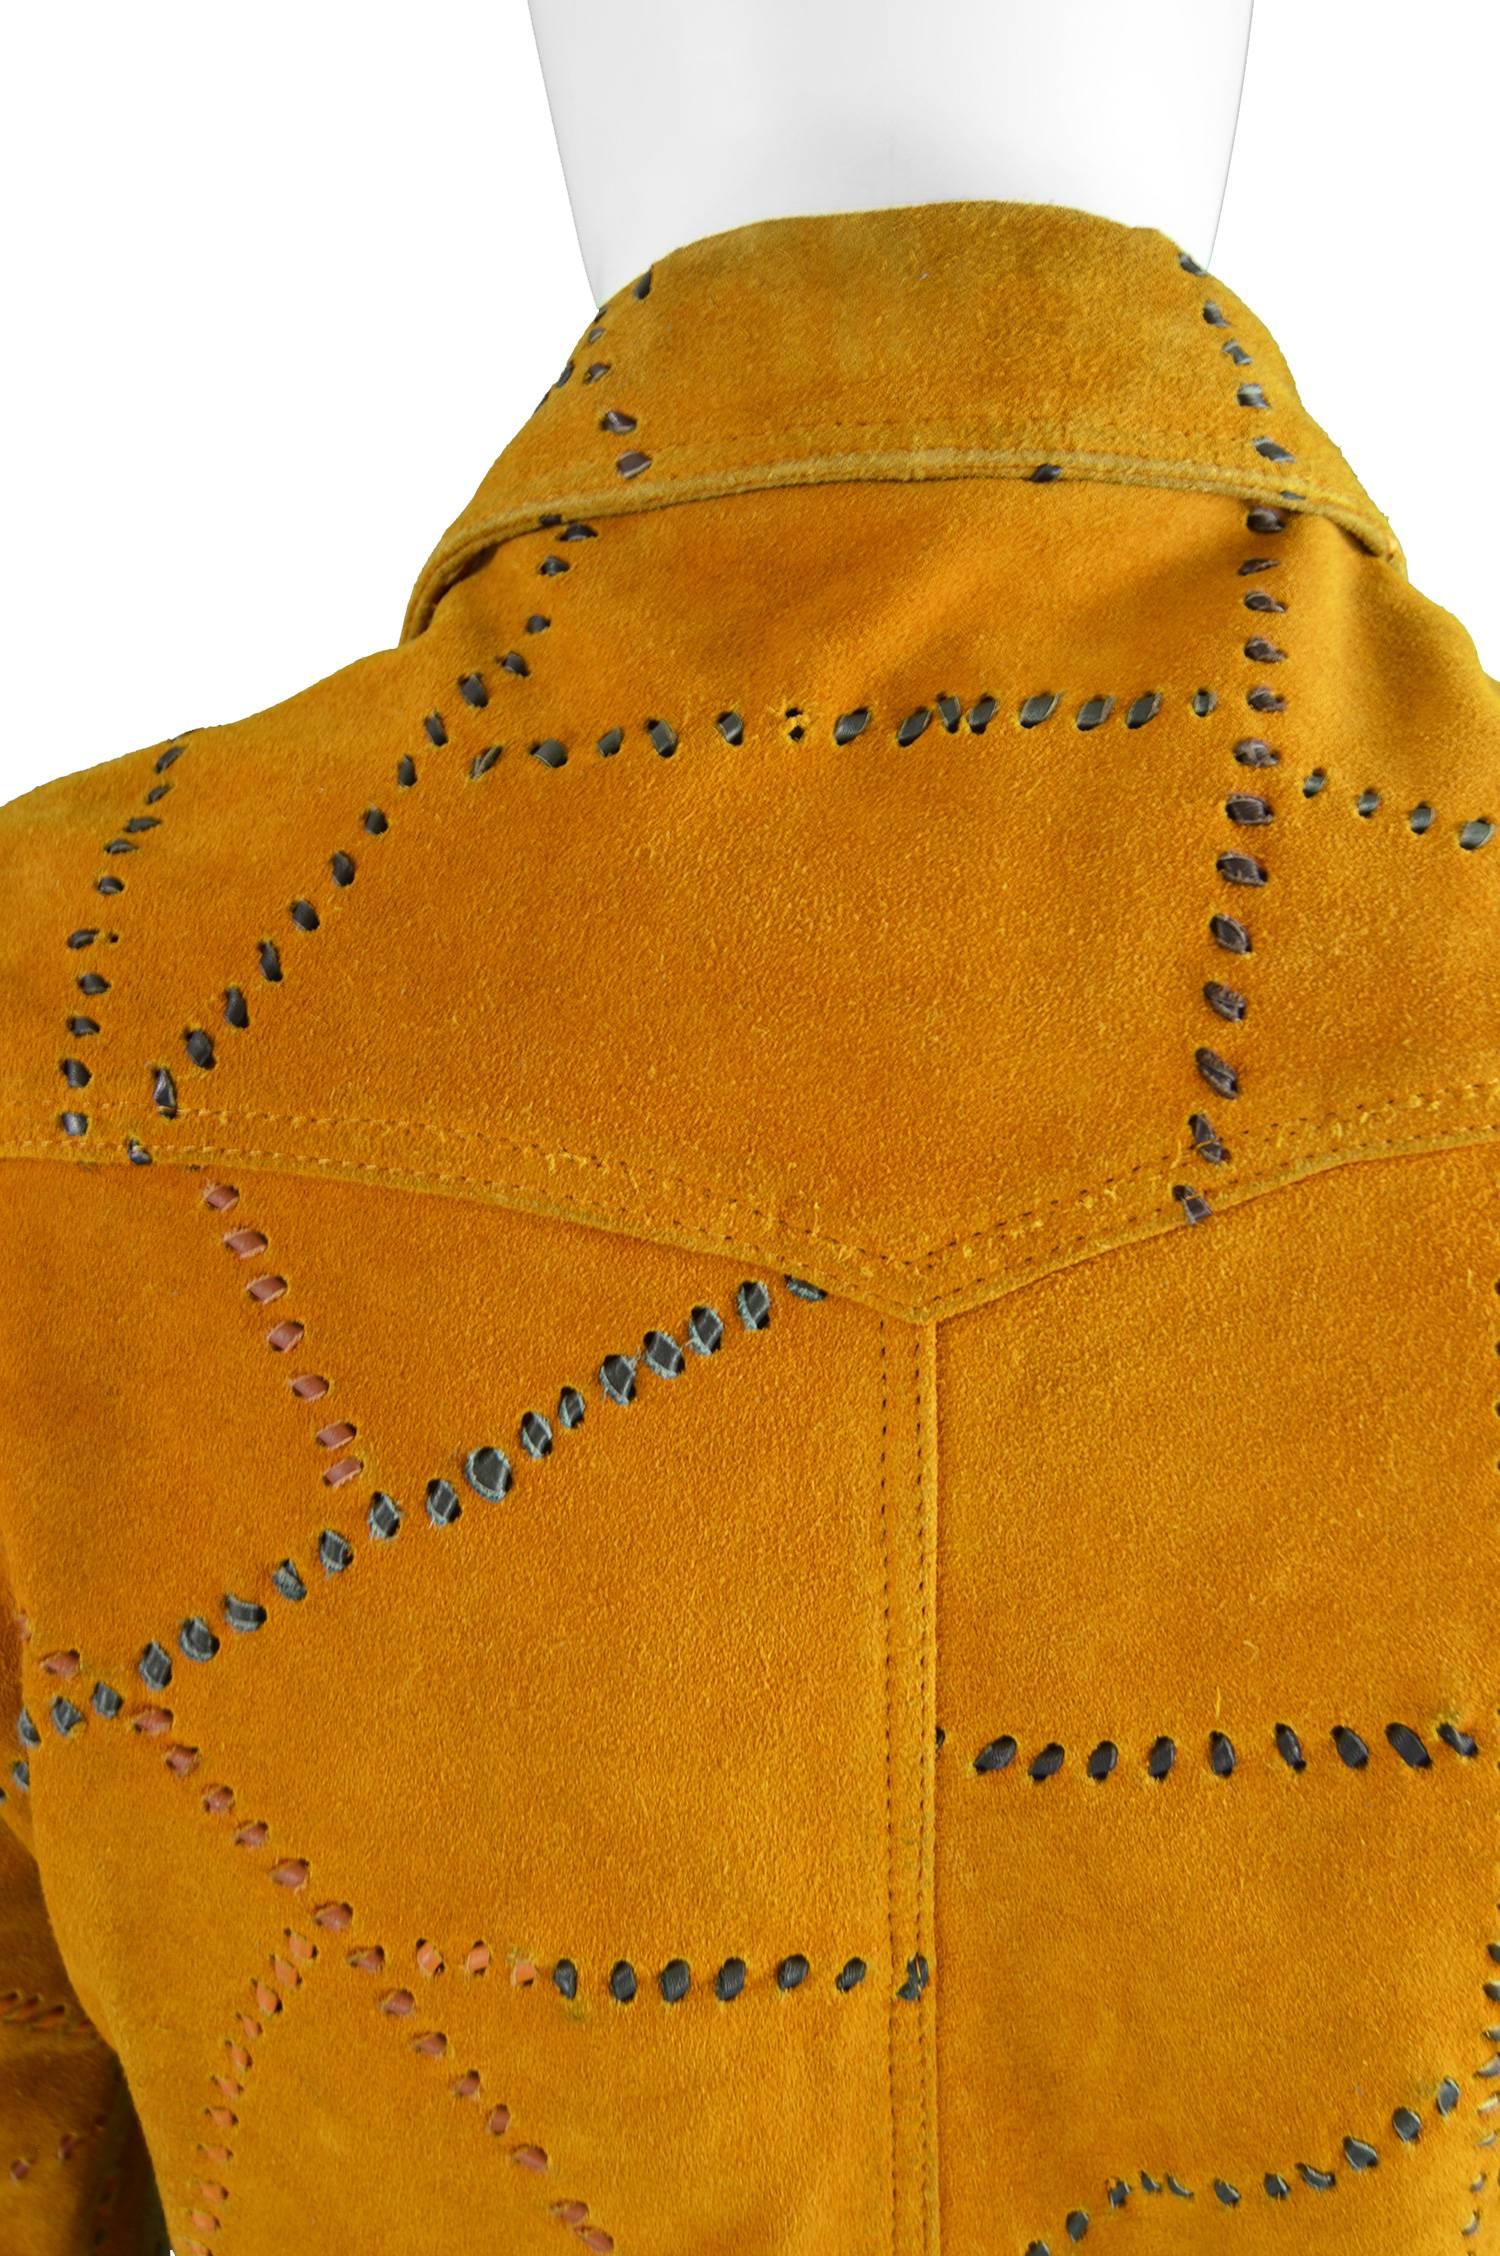 Vintage Men's Hand Crafted Tan Suede Whip Stitch Jacket, 1970s In Good Condition For Sale In Doncaster, South Yorkshire